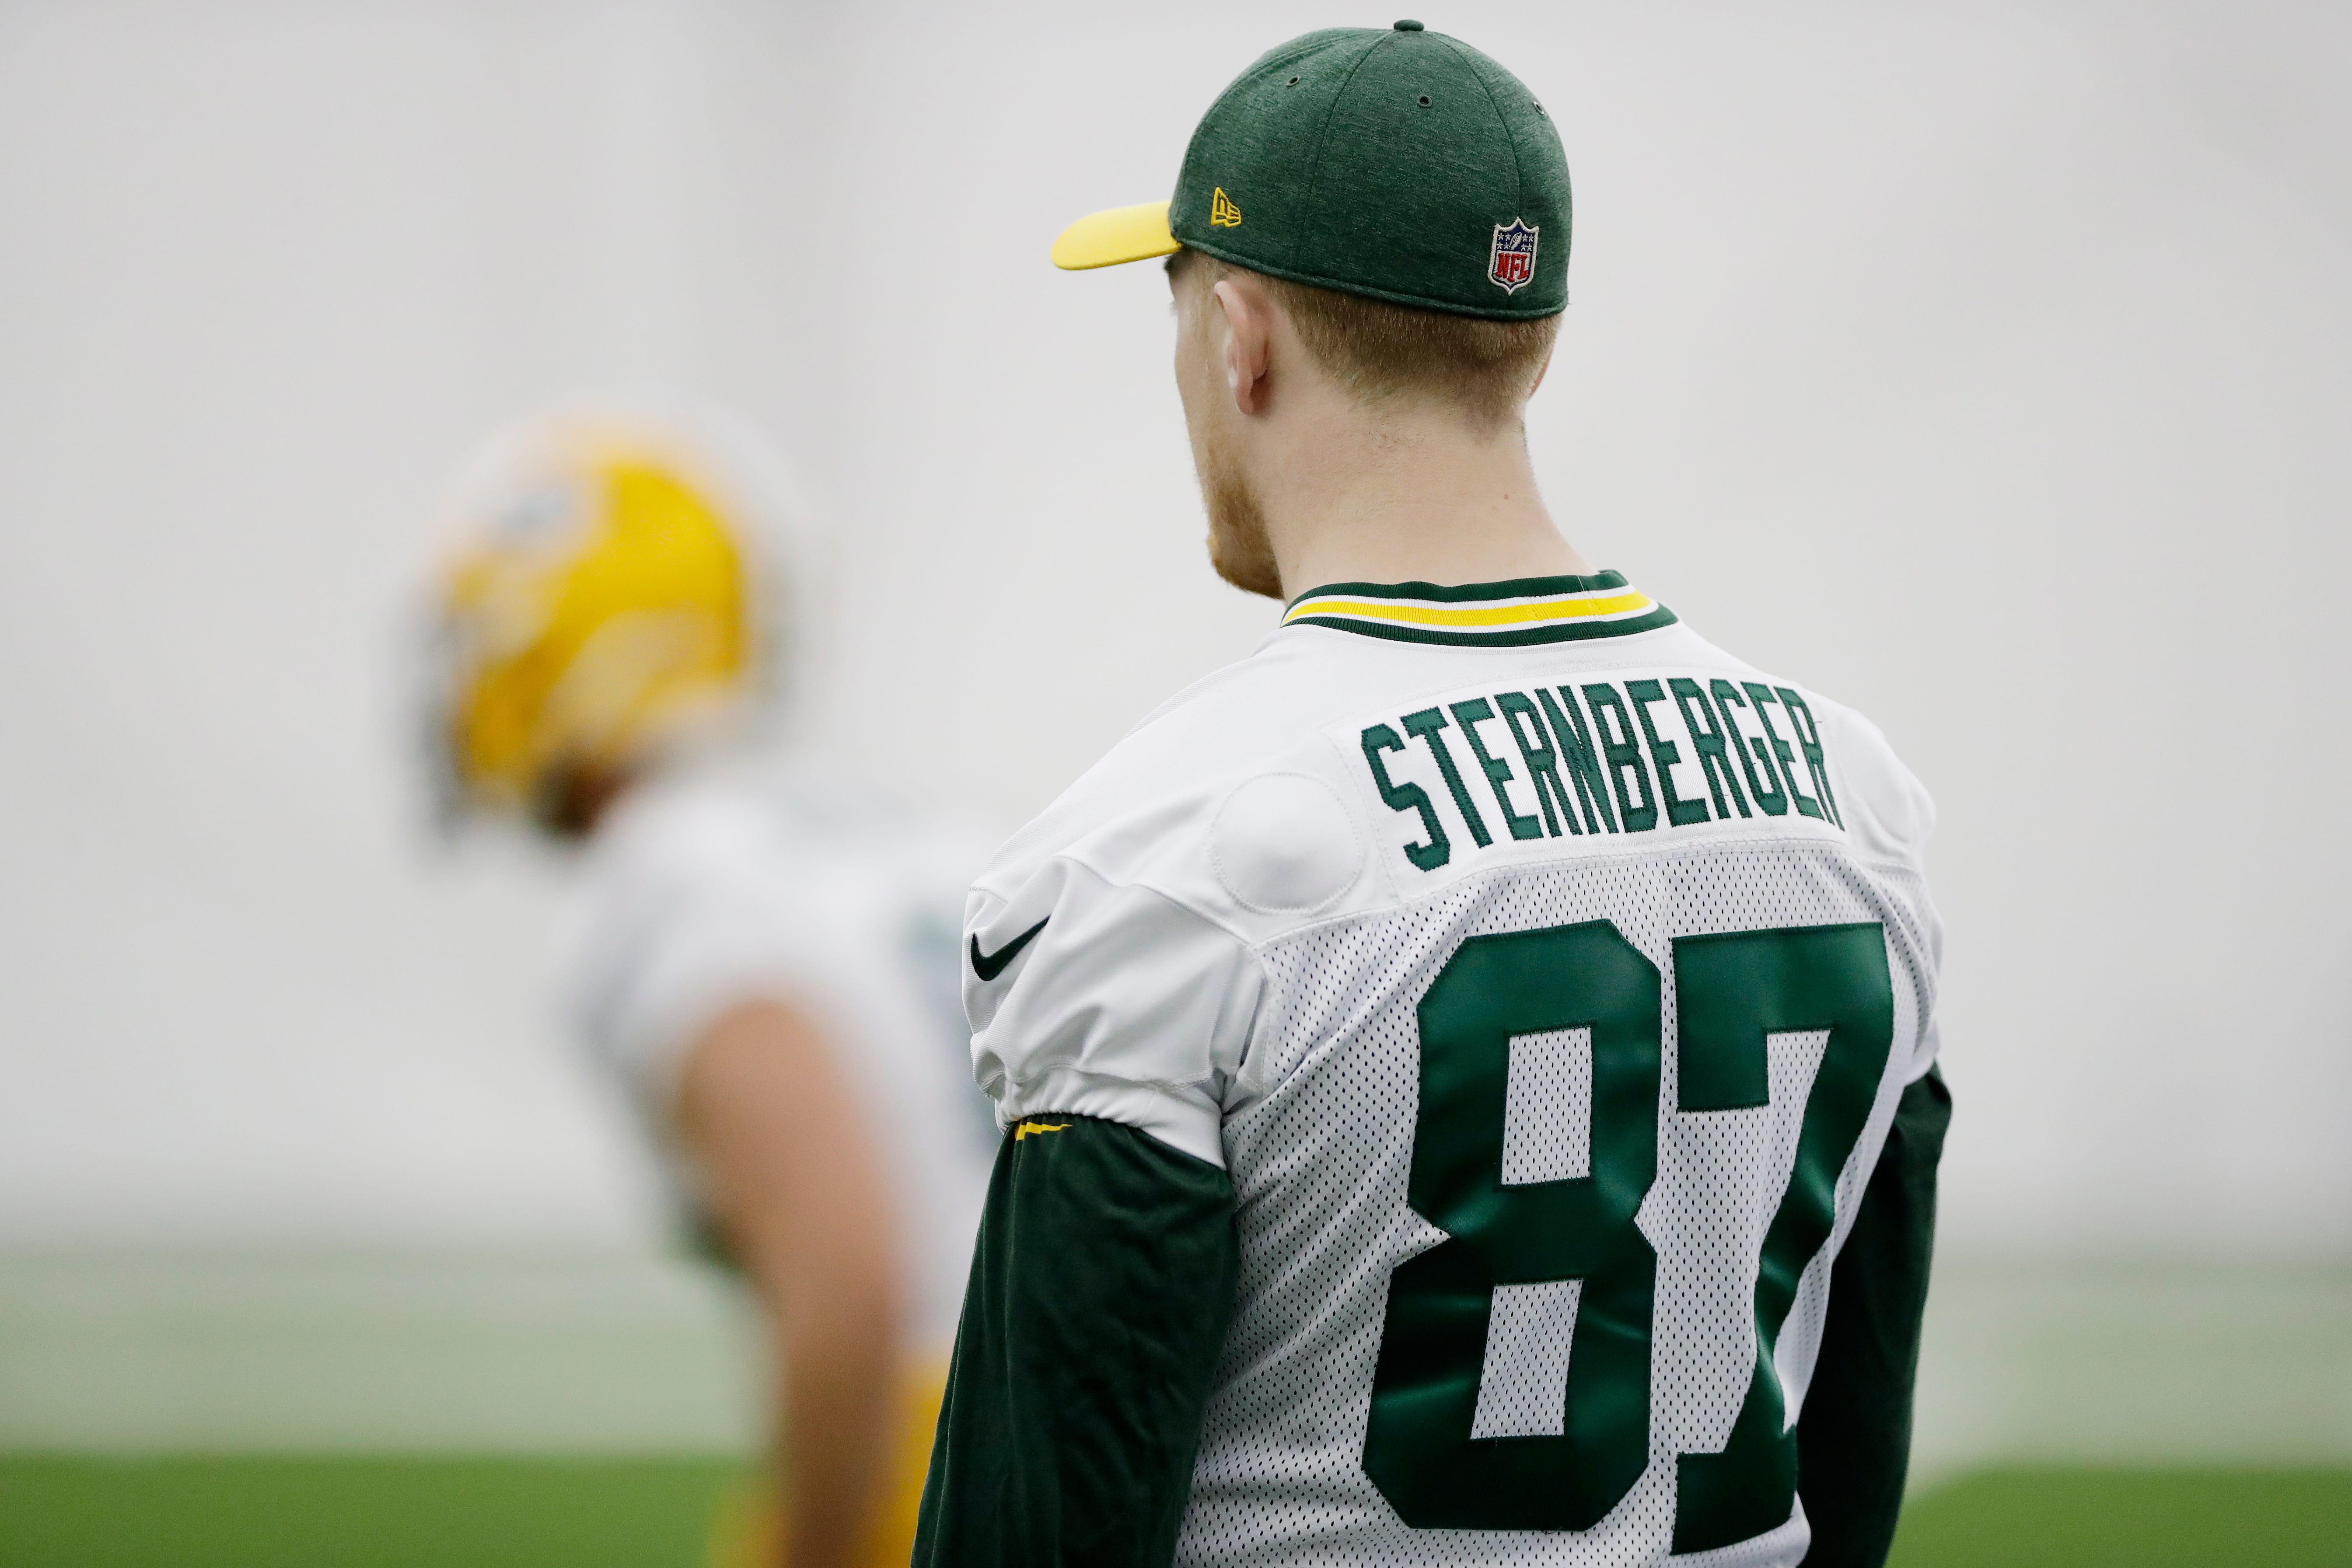 Green Bay Packers tight end Jace Sternberger (87) during practice at rookie minicamp at the Don Hutson Center on Friday, May 3, 2019 in Ashwaubenon, Wis.
Adam Wesley/USA TODAY NETWORK-Wis